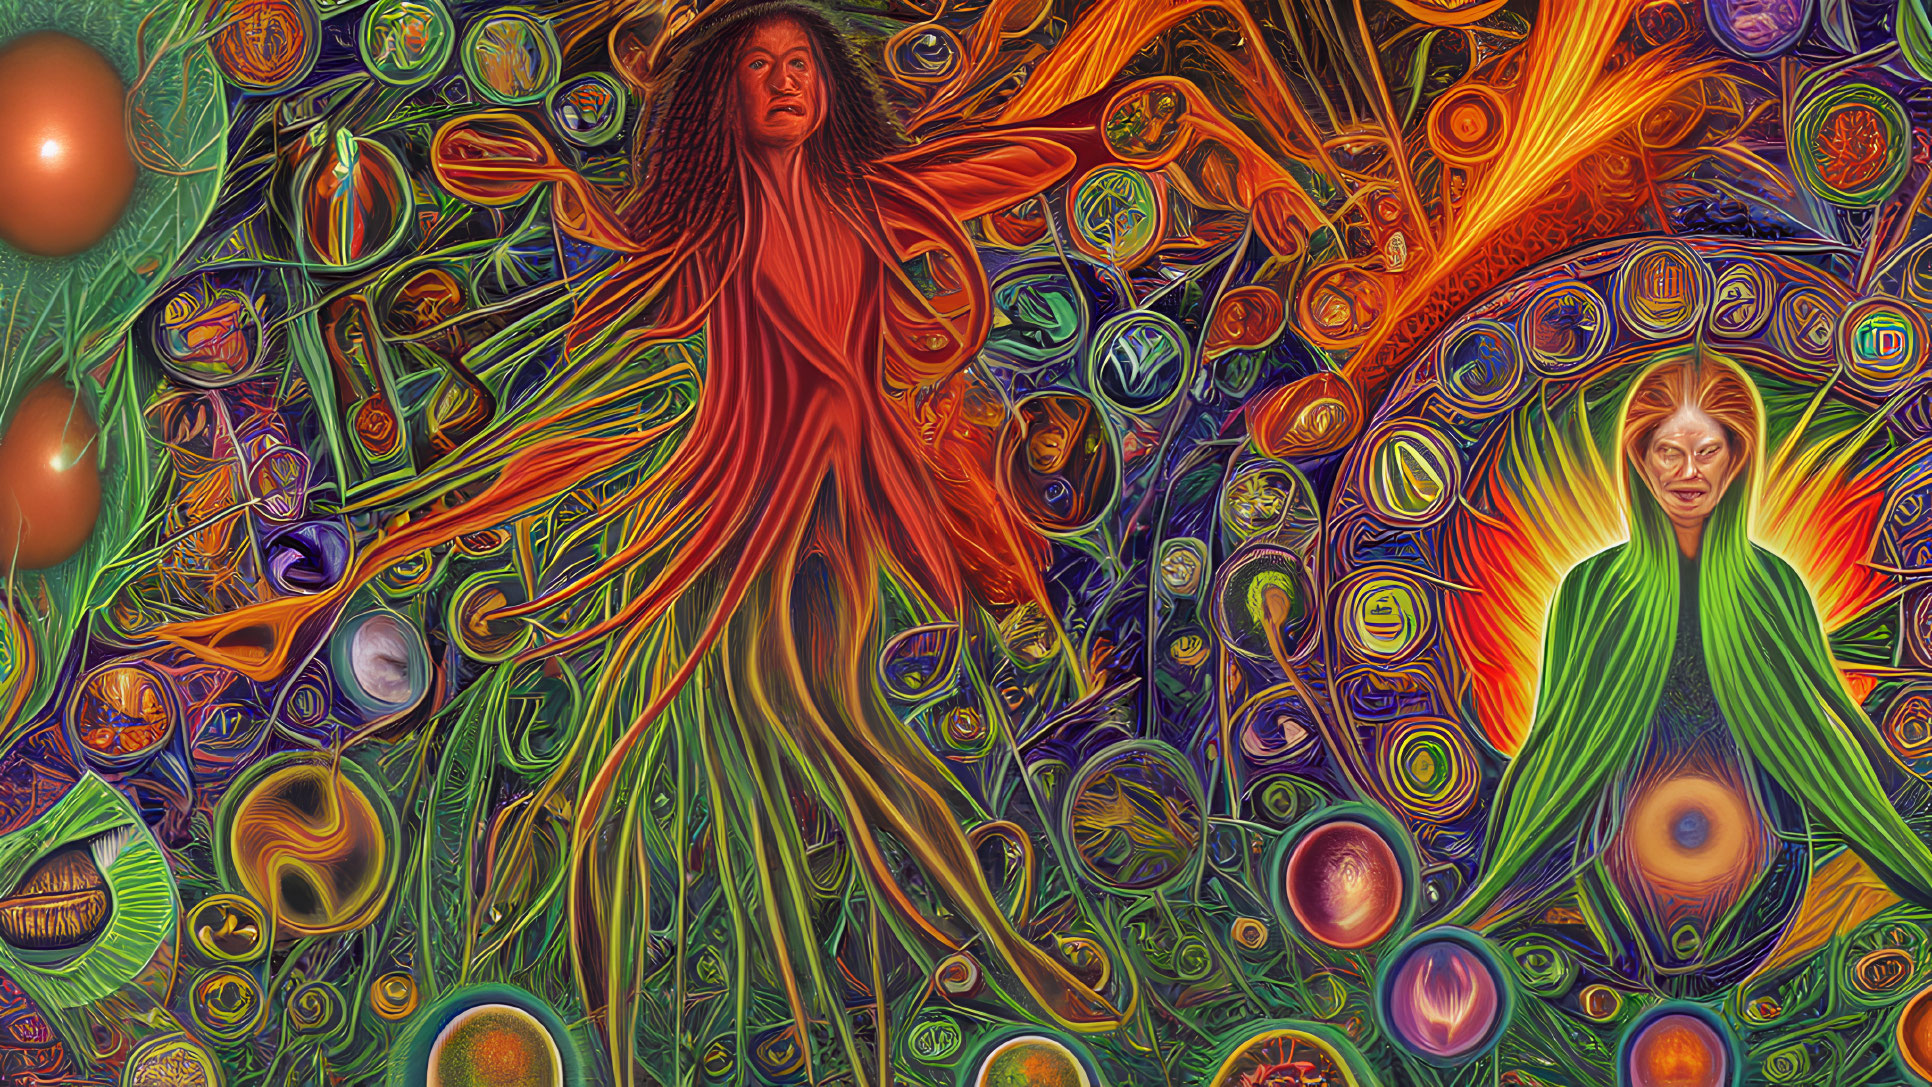 Colorful Psychedelic Artwork with Humanoid Figures in Elongated Limbs